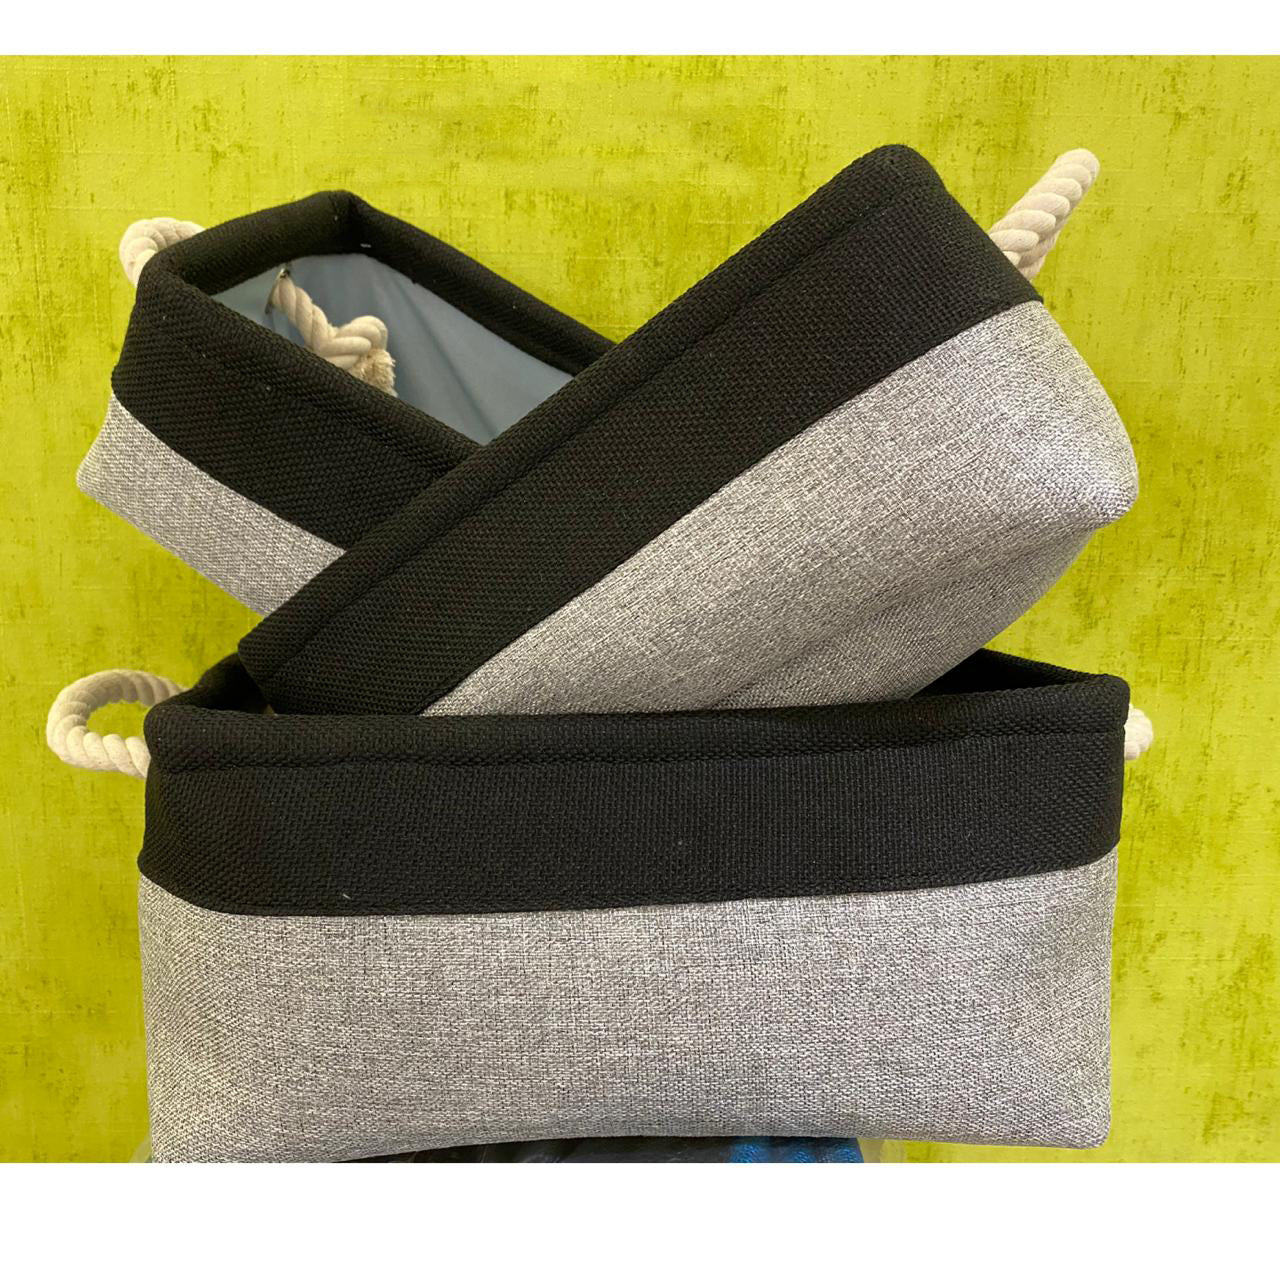 black-grey-color-Loomsmith-jute-storage-basket-with-drawstring-handle-in-three-sizes-rope-handle-to-store-purpose